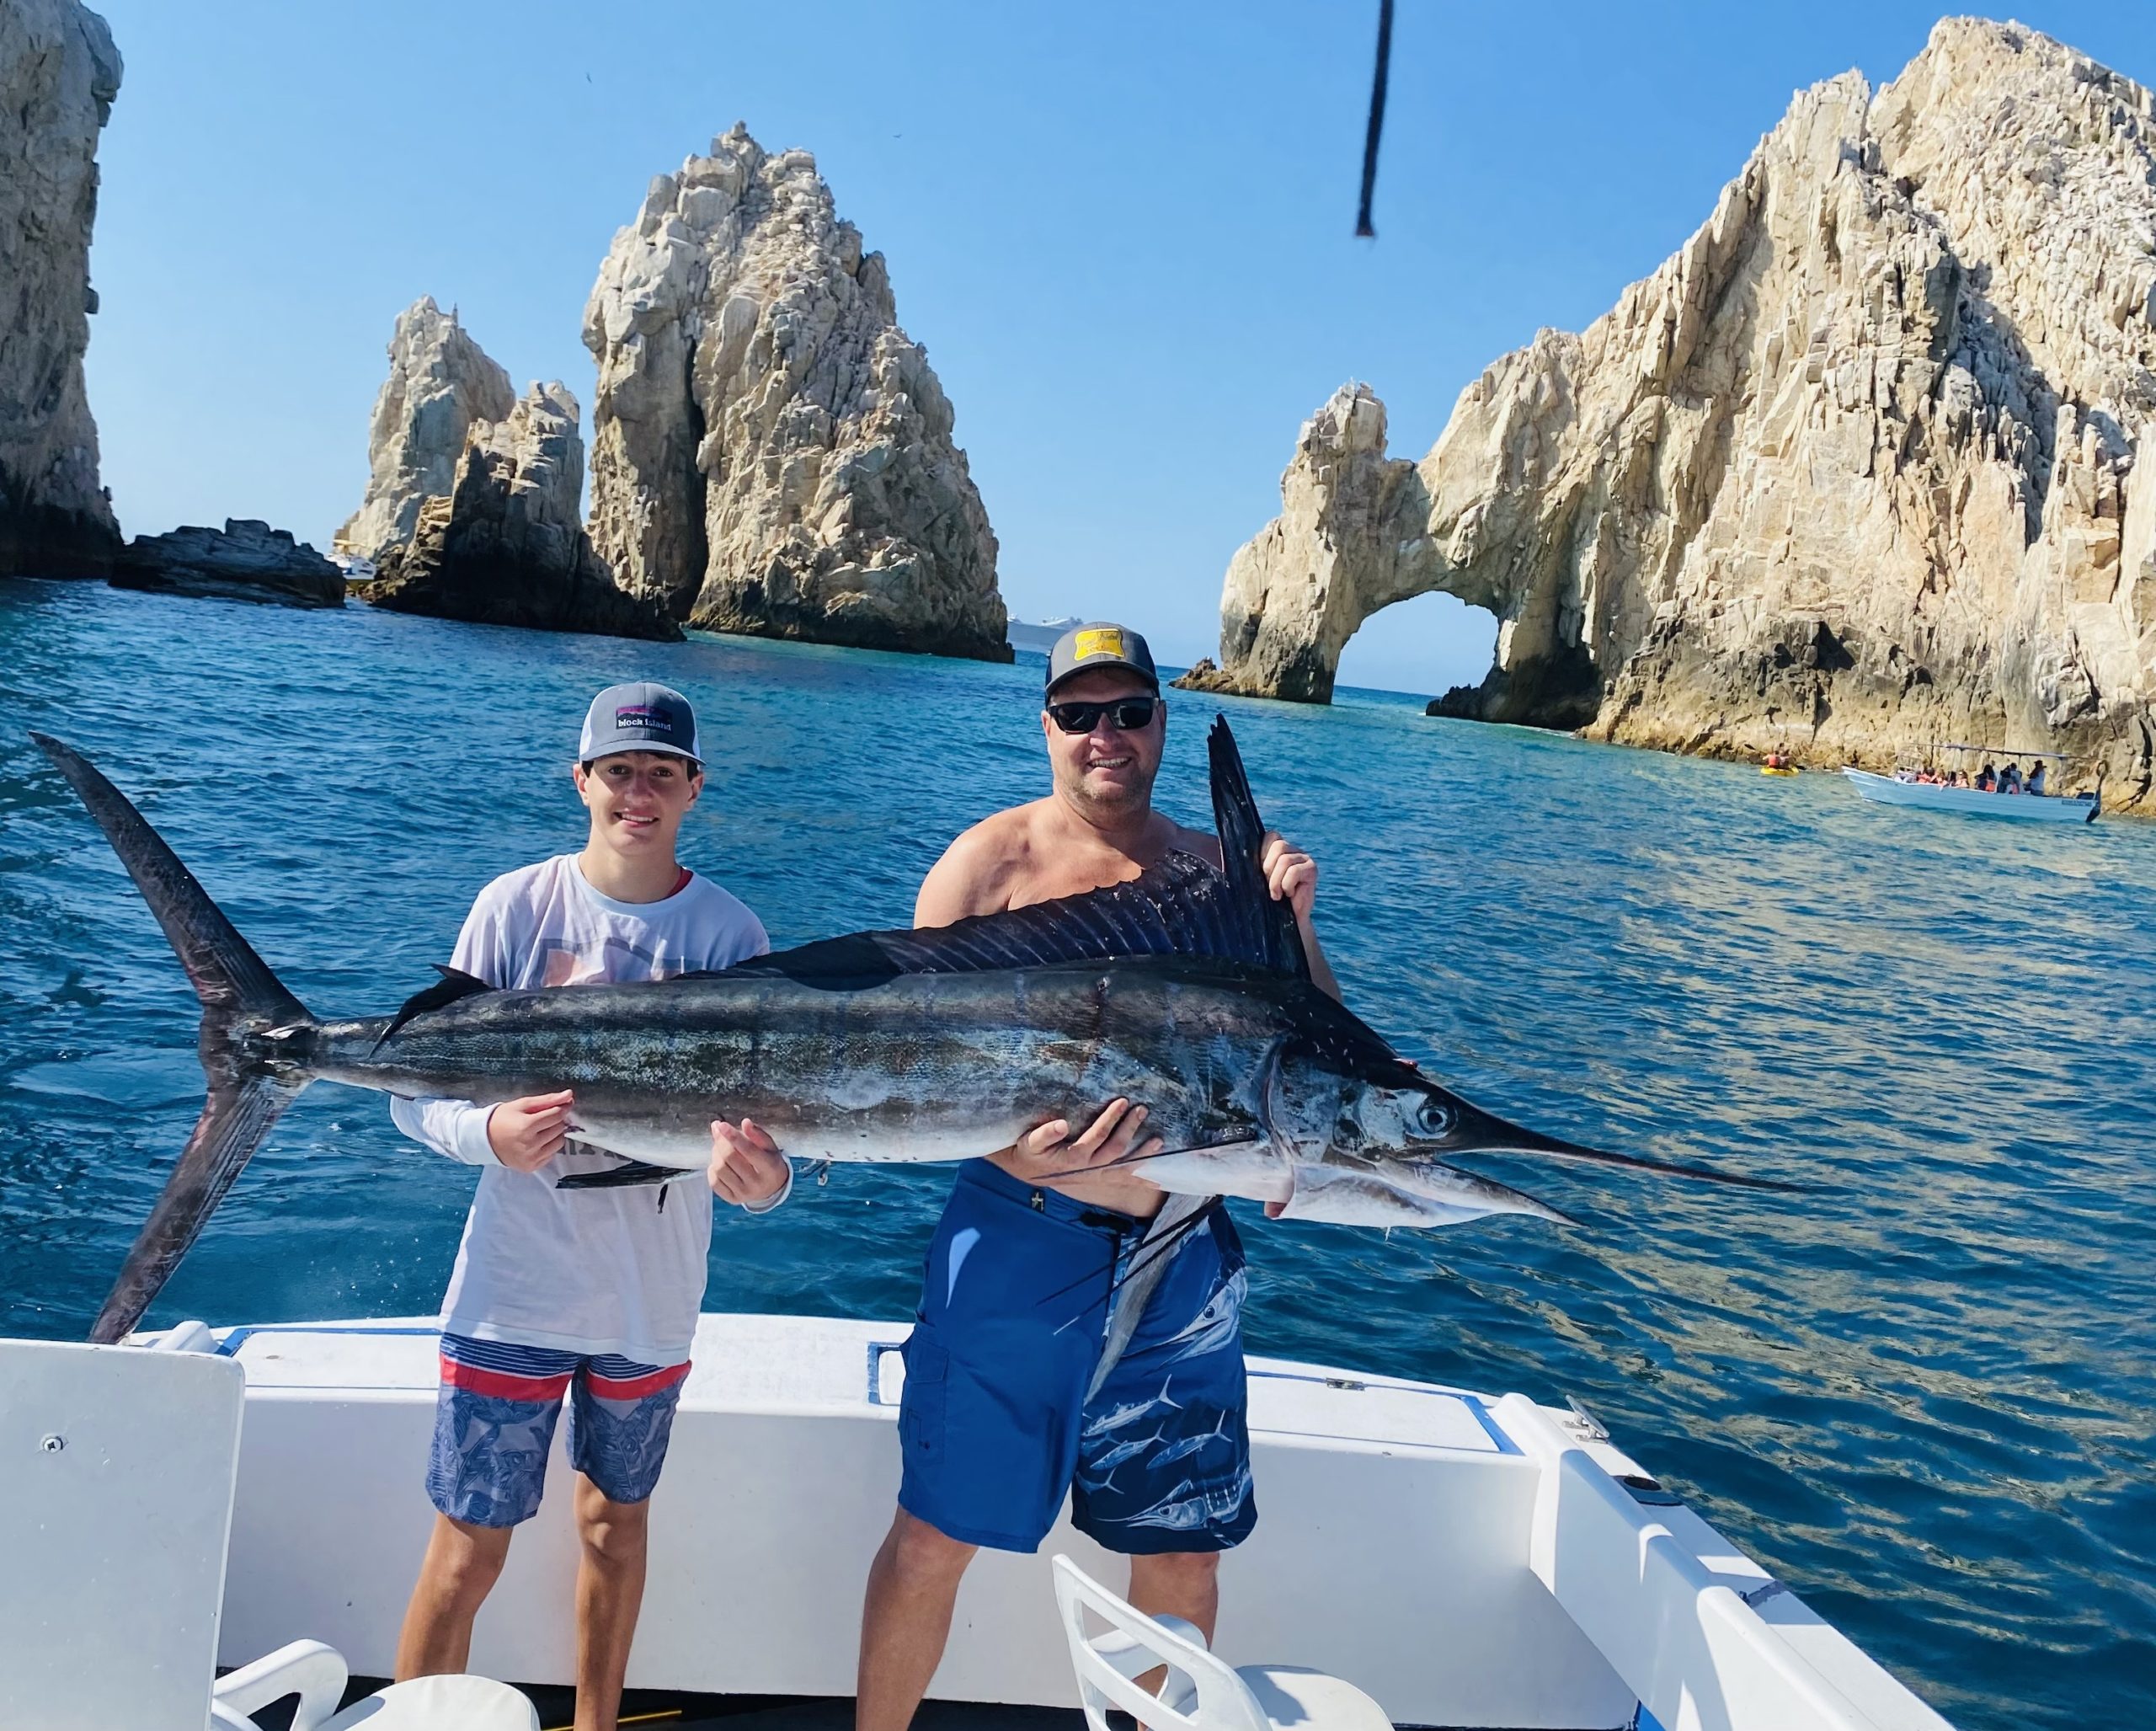 Joseph and Matt Bobek decked another big striped marlin last week while visiting Cabo San Lucas.